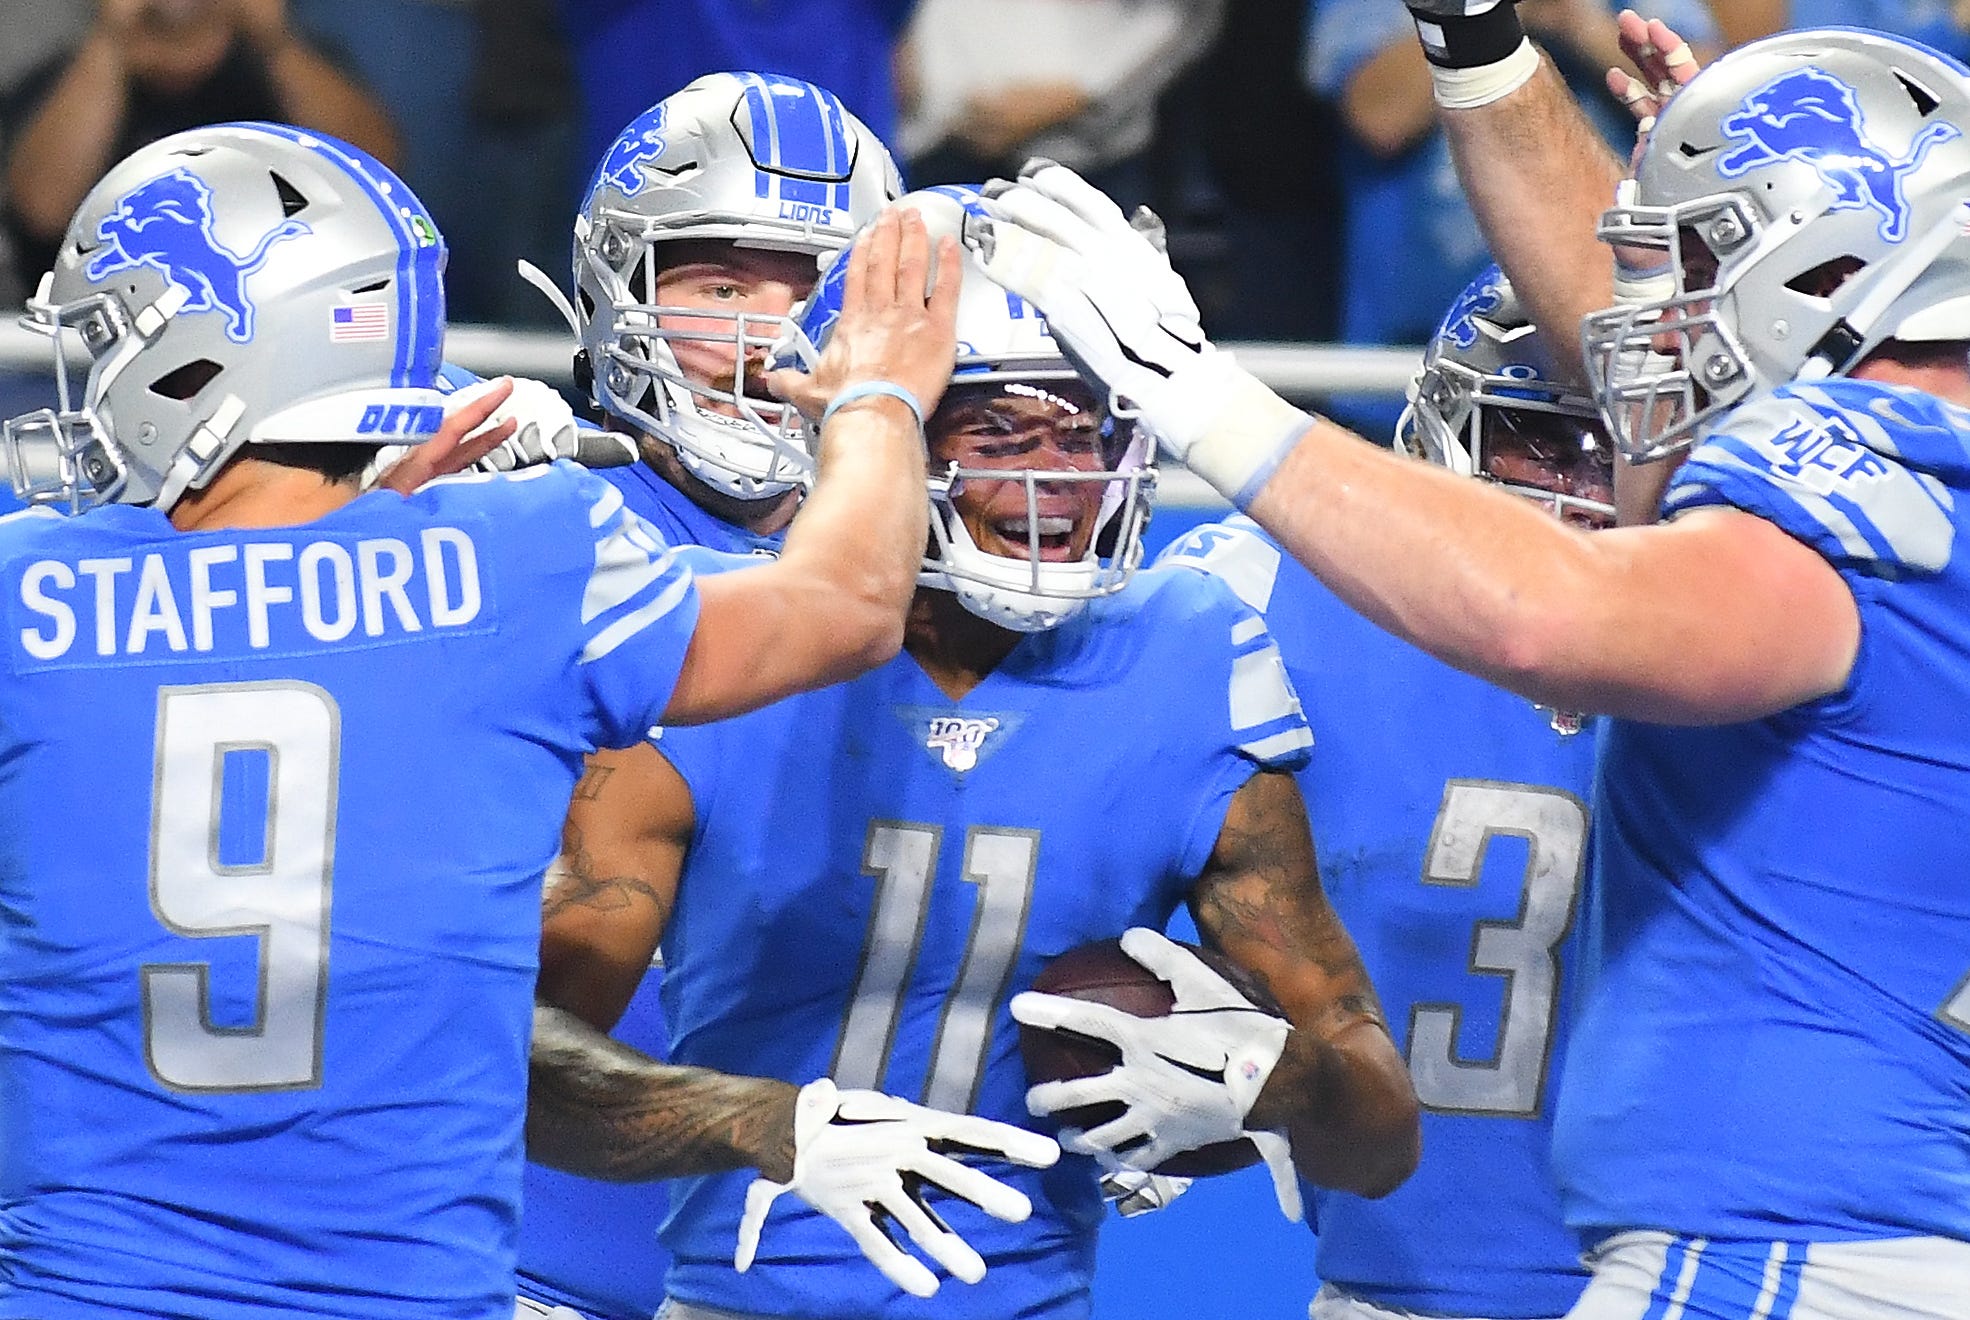 Lions' Marvin Jones celebrates with teammates Matthew Stafford and Frank Ragnow after his third touchdown reception in the second quarter.